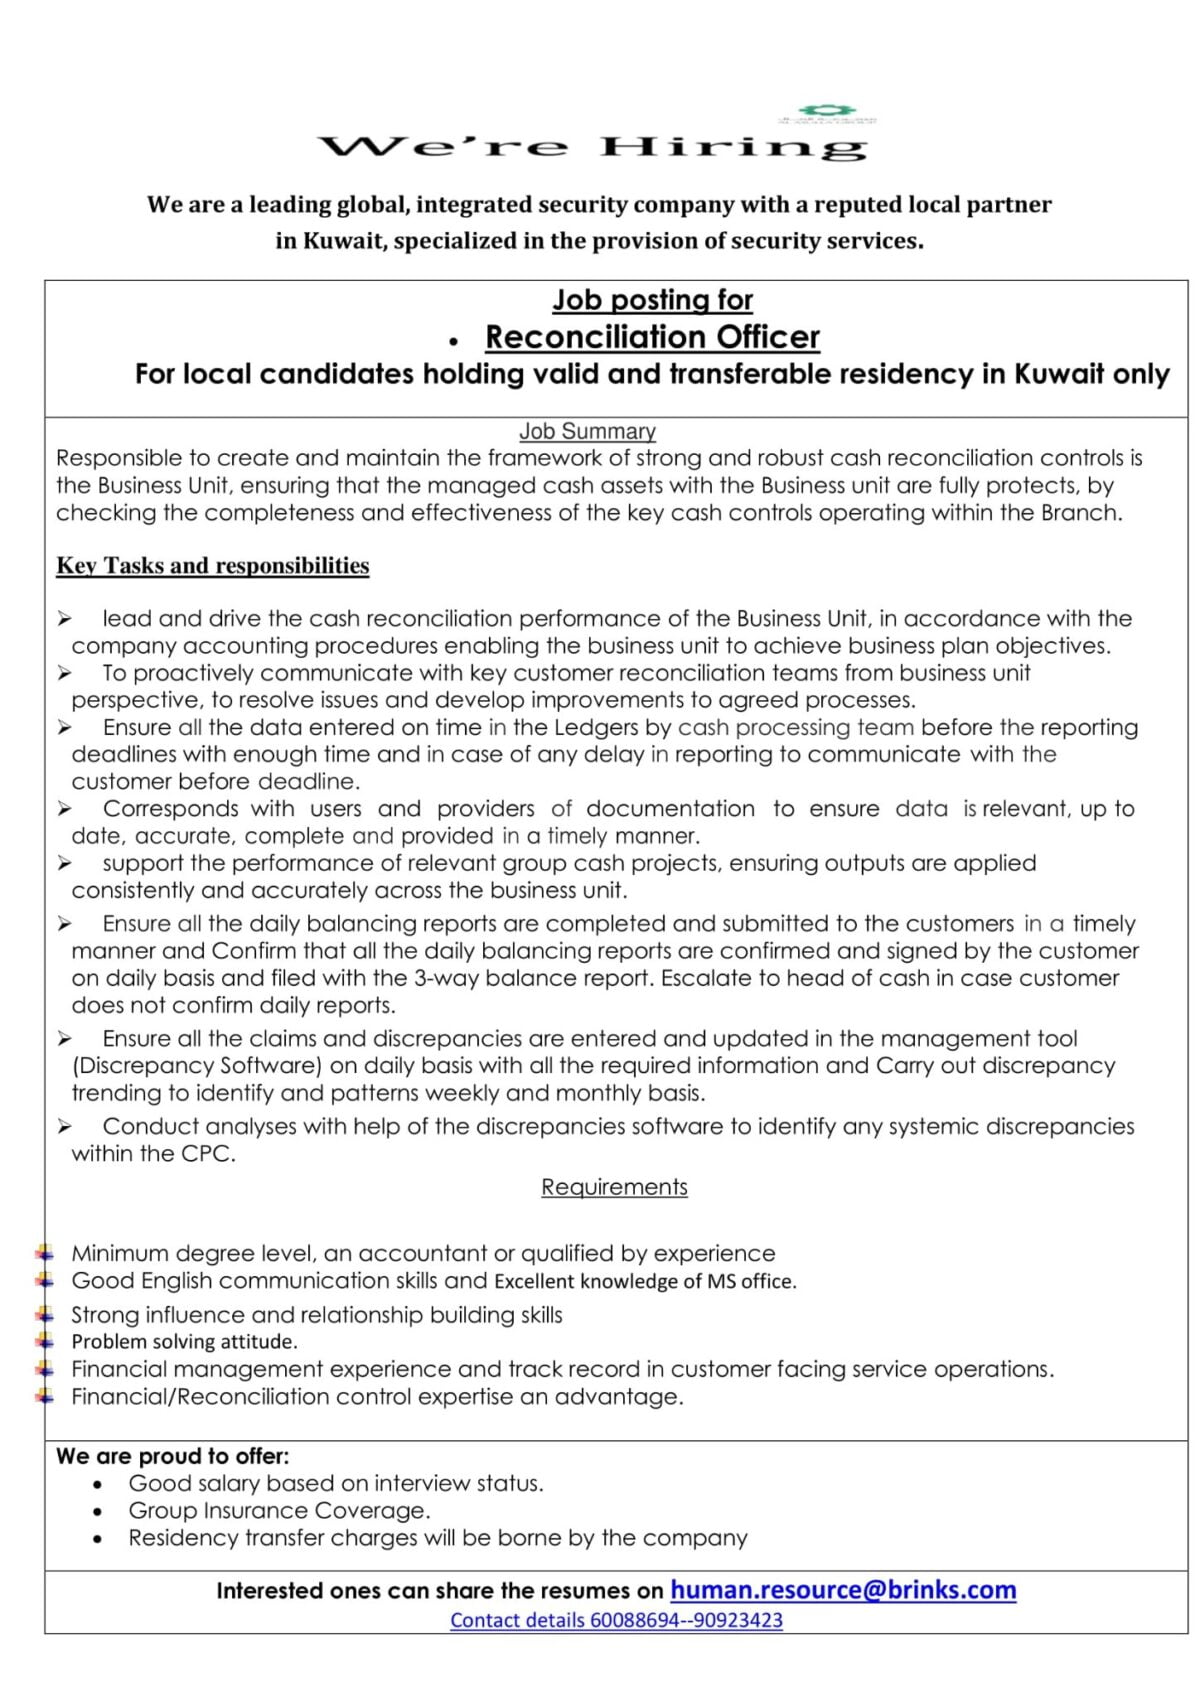 AlMulla Kuwait Company Job Vacancy, Reconciliation Officer